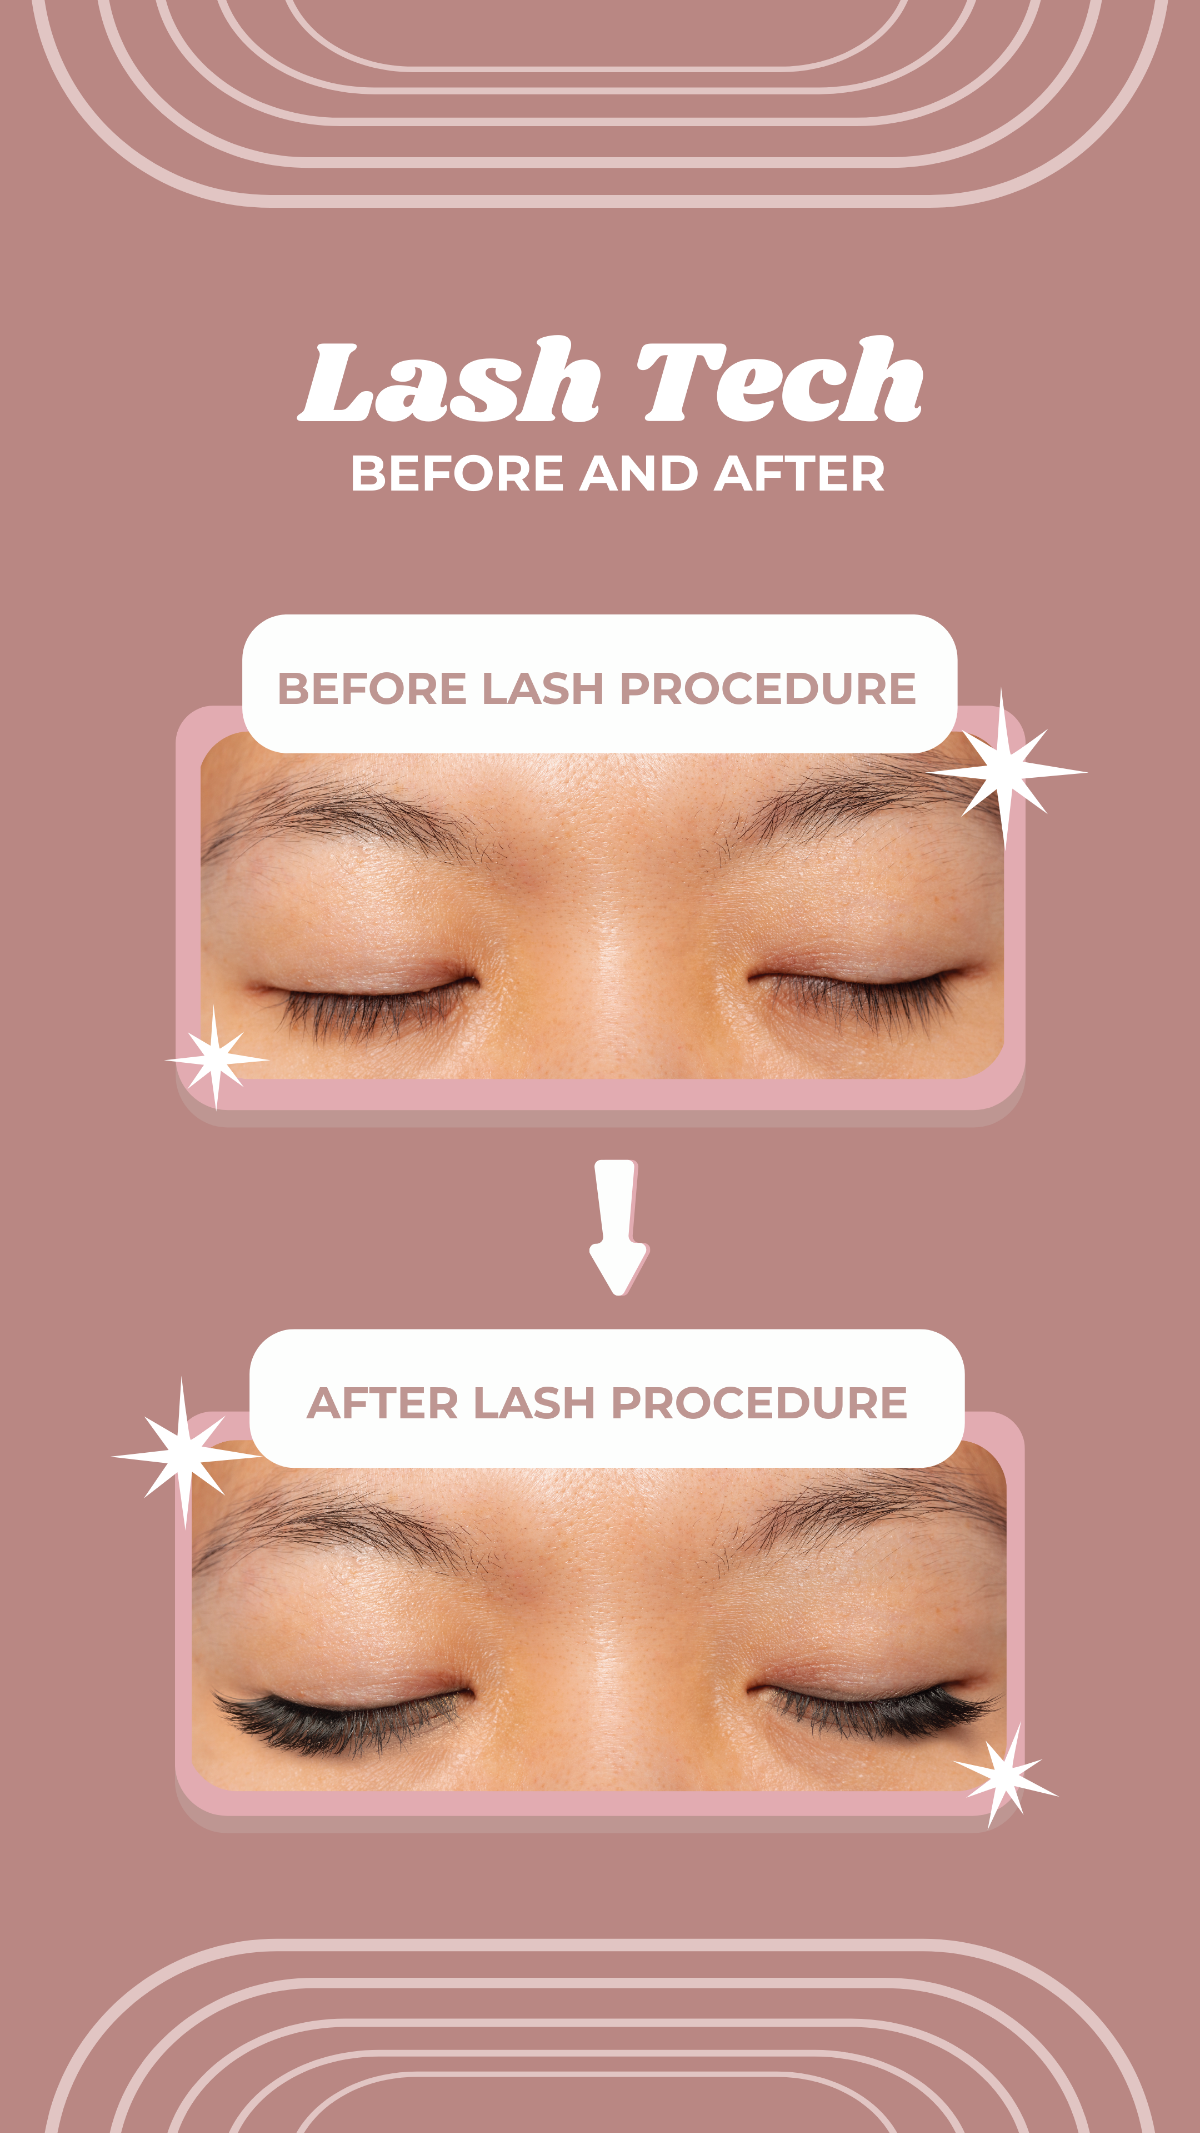 Lash Tech Before and After Instagram Post Template